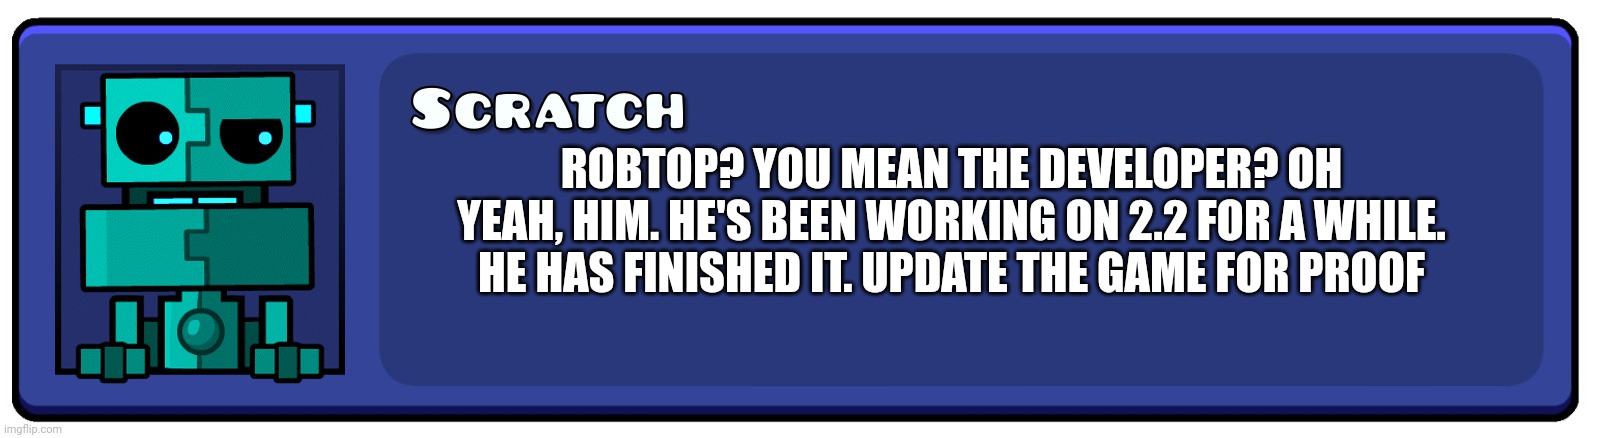 Geometry Dash Textbox | ROBTOP? YOU MEAN THE DEVELOPER? OH YEAH, HIM. HE'S BEEN WORKING ON 2.2 FOR A WHILE. HE HAS FINISHED IT. UPDATE THE GAME FOR PROOF | image tagged in geometry dash textbox | made w/ Imgflip meme maker